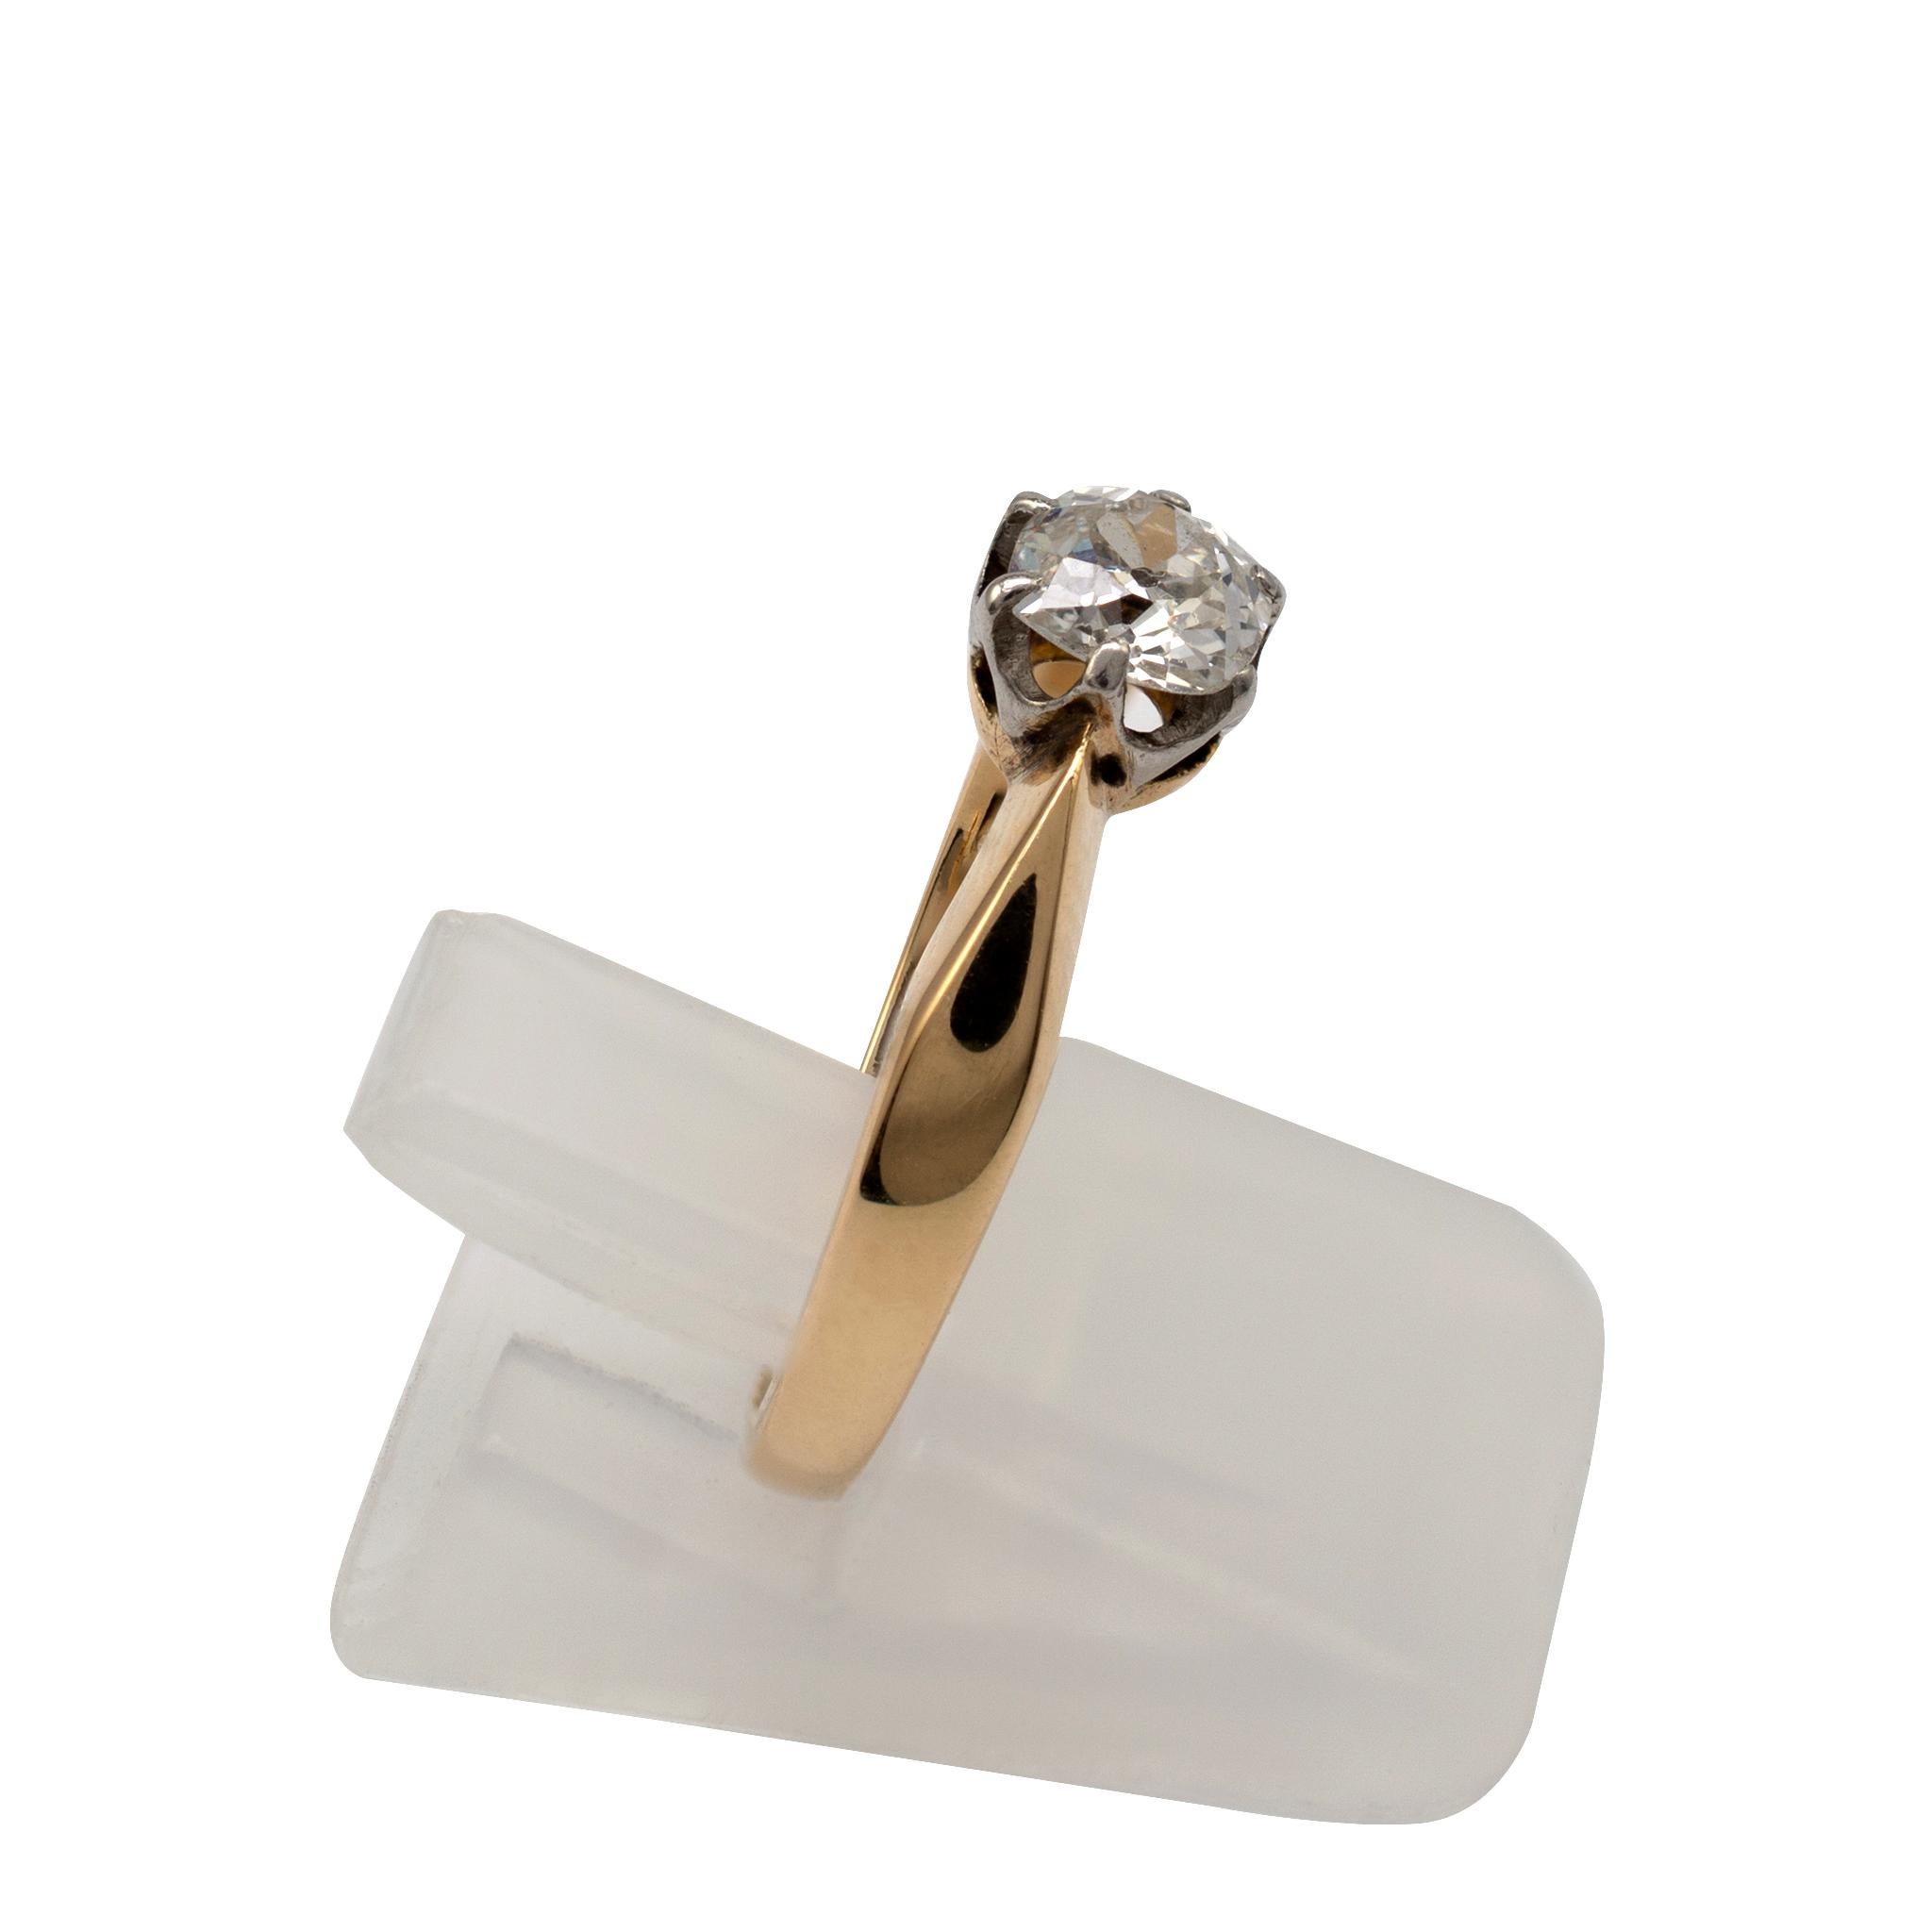 Diamond Solitaire Engagement Ring 0.50 Carat Old Cut, 18 Karat Gold, circa 1970s For Sale 3